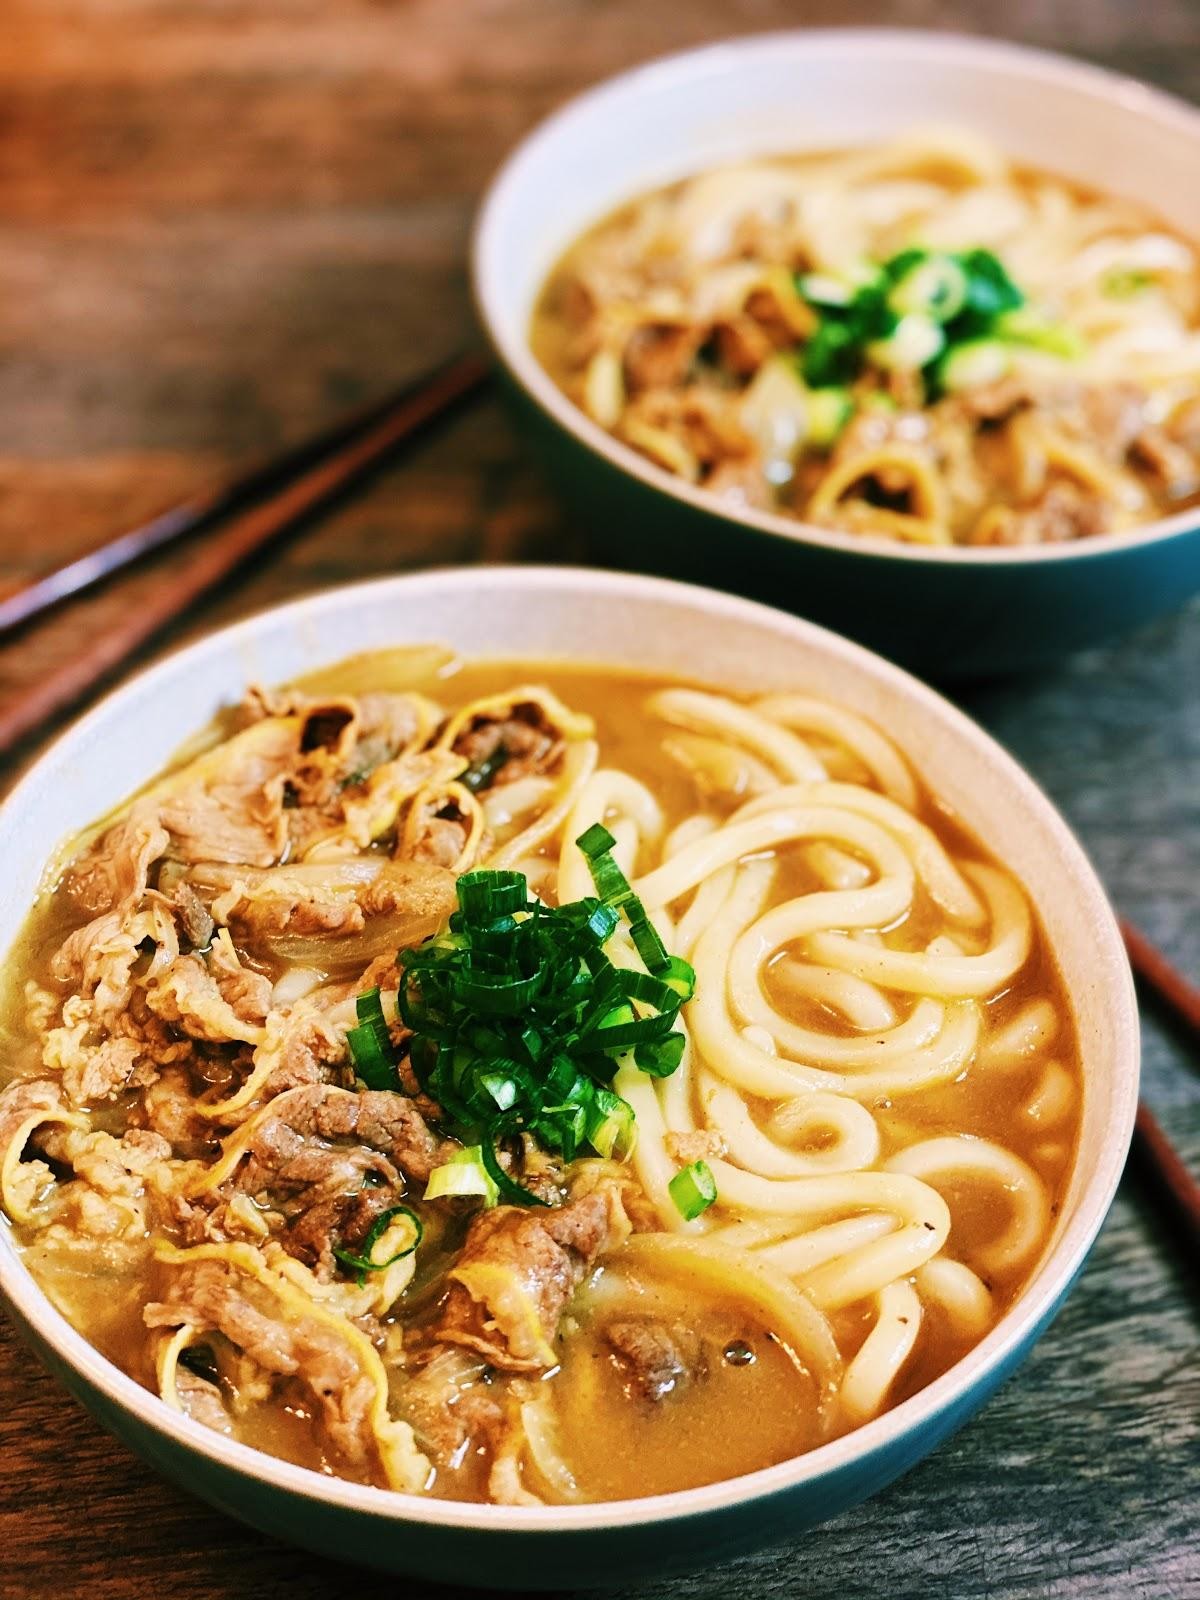 Curry Beef Udon   カレーうどん- ビーフ